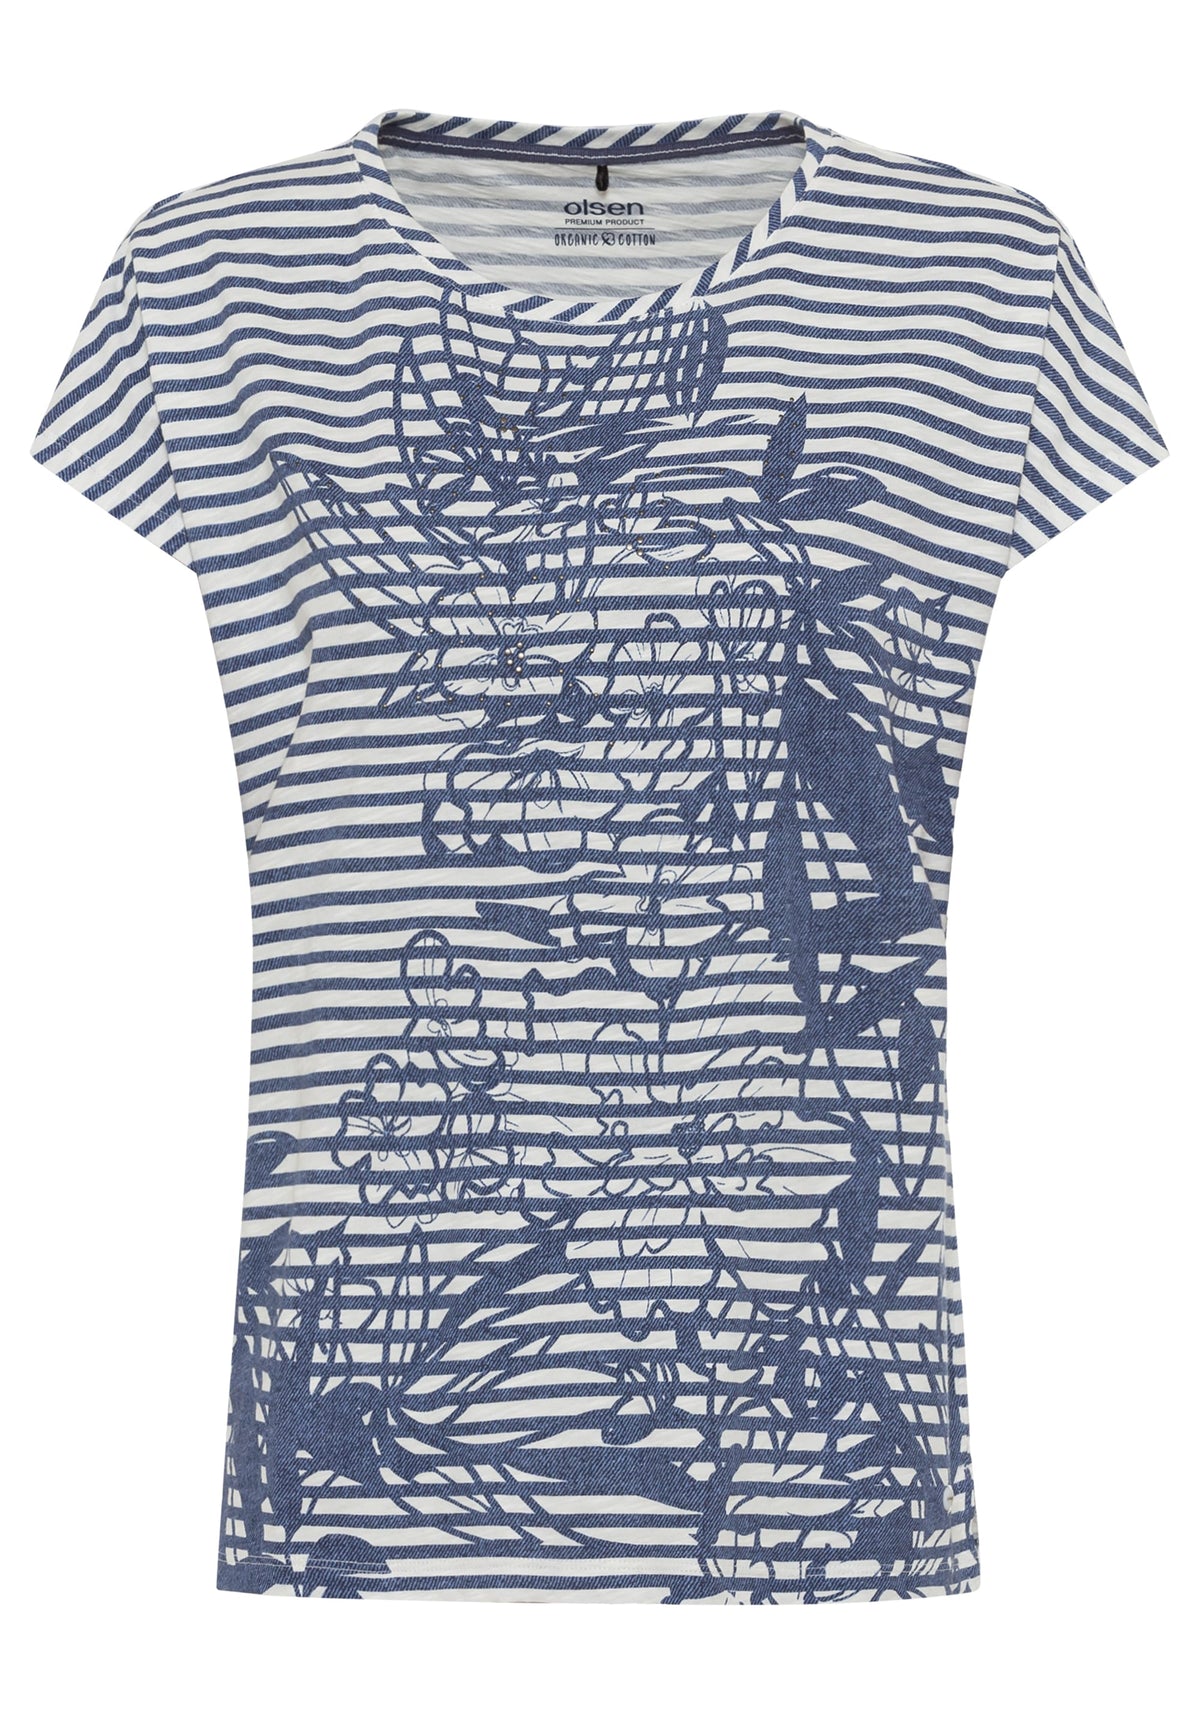 100% Cotton Stripe and Floral T-Shirt